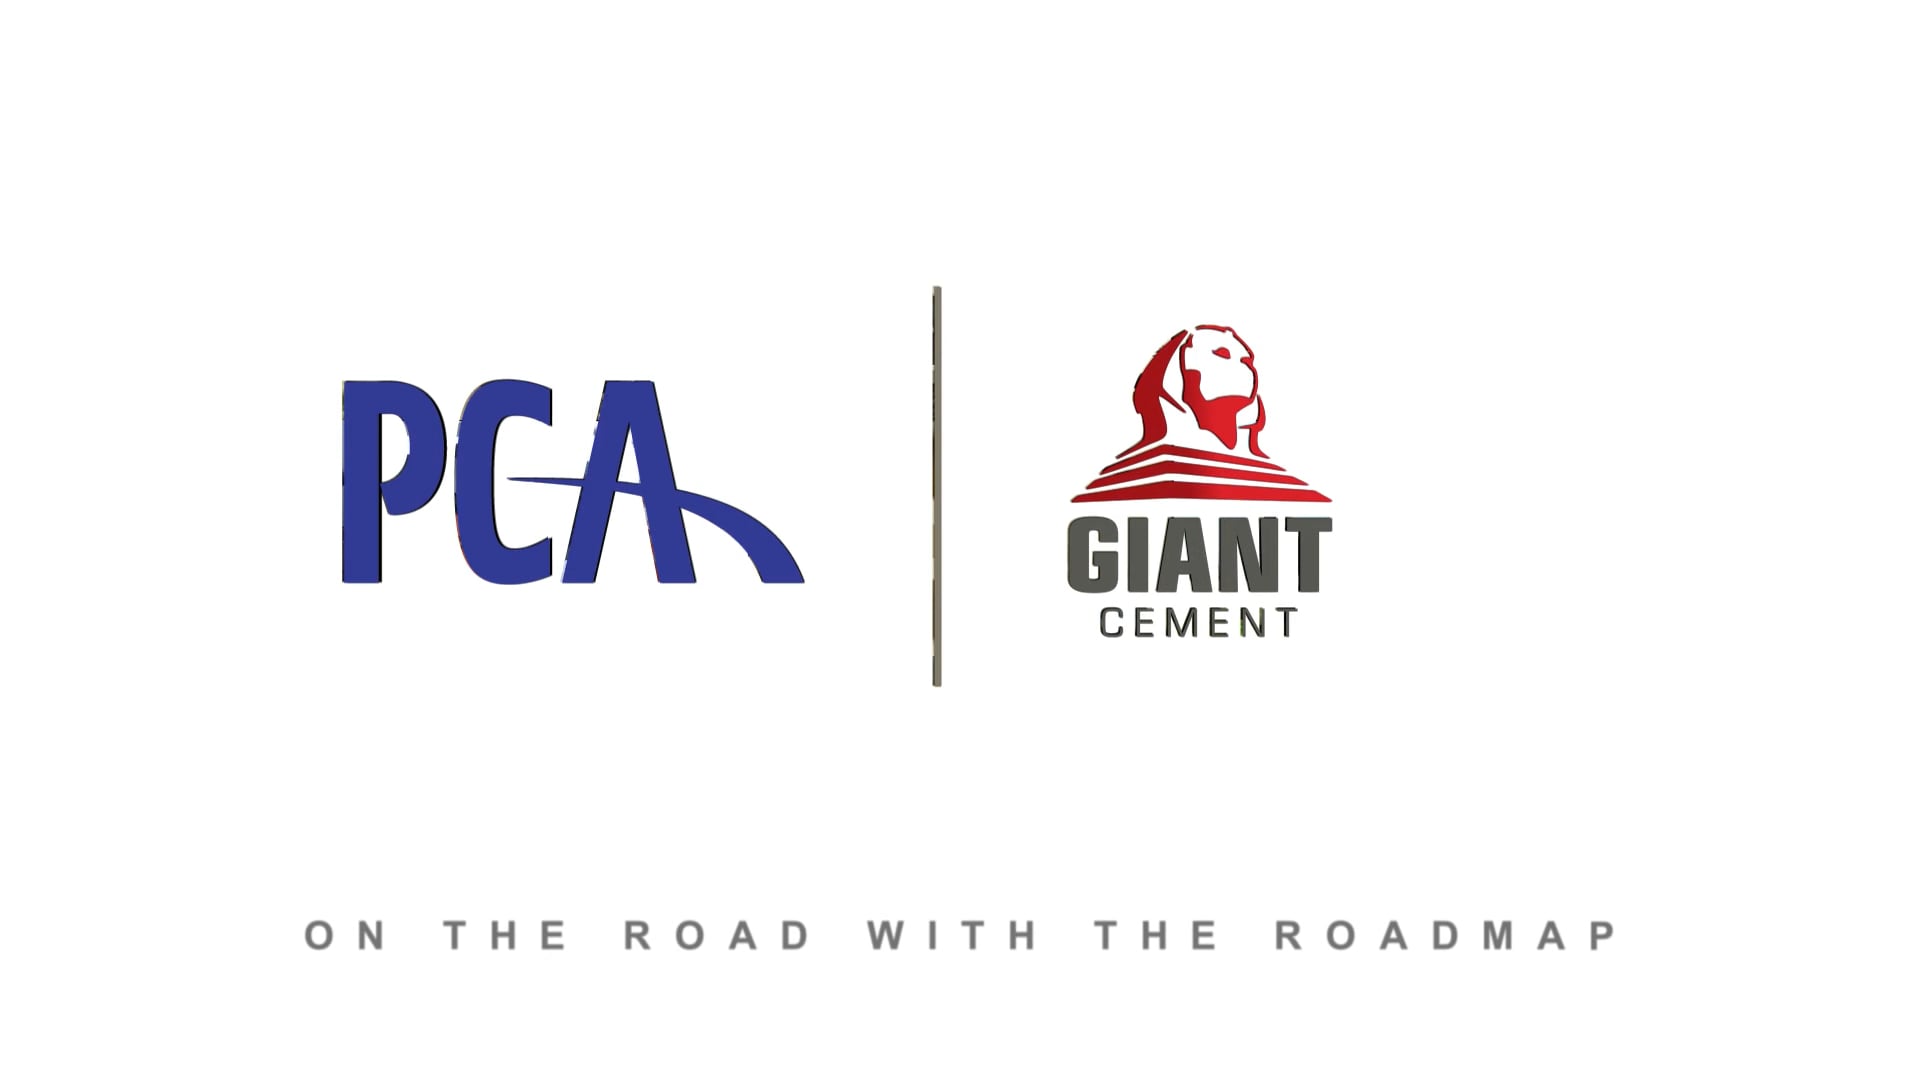 Giant Cement: Inspiring the Next Generation